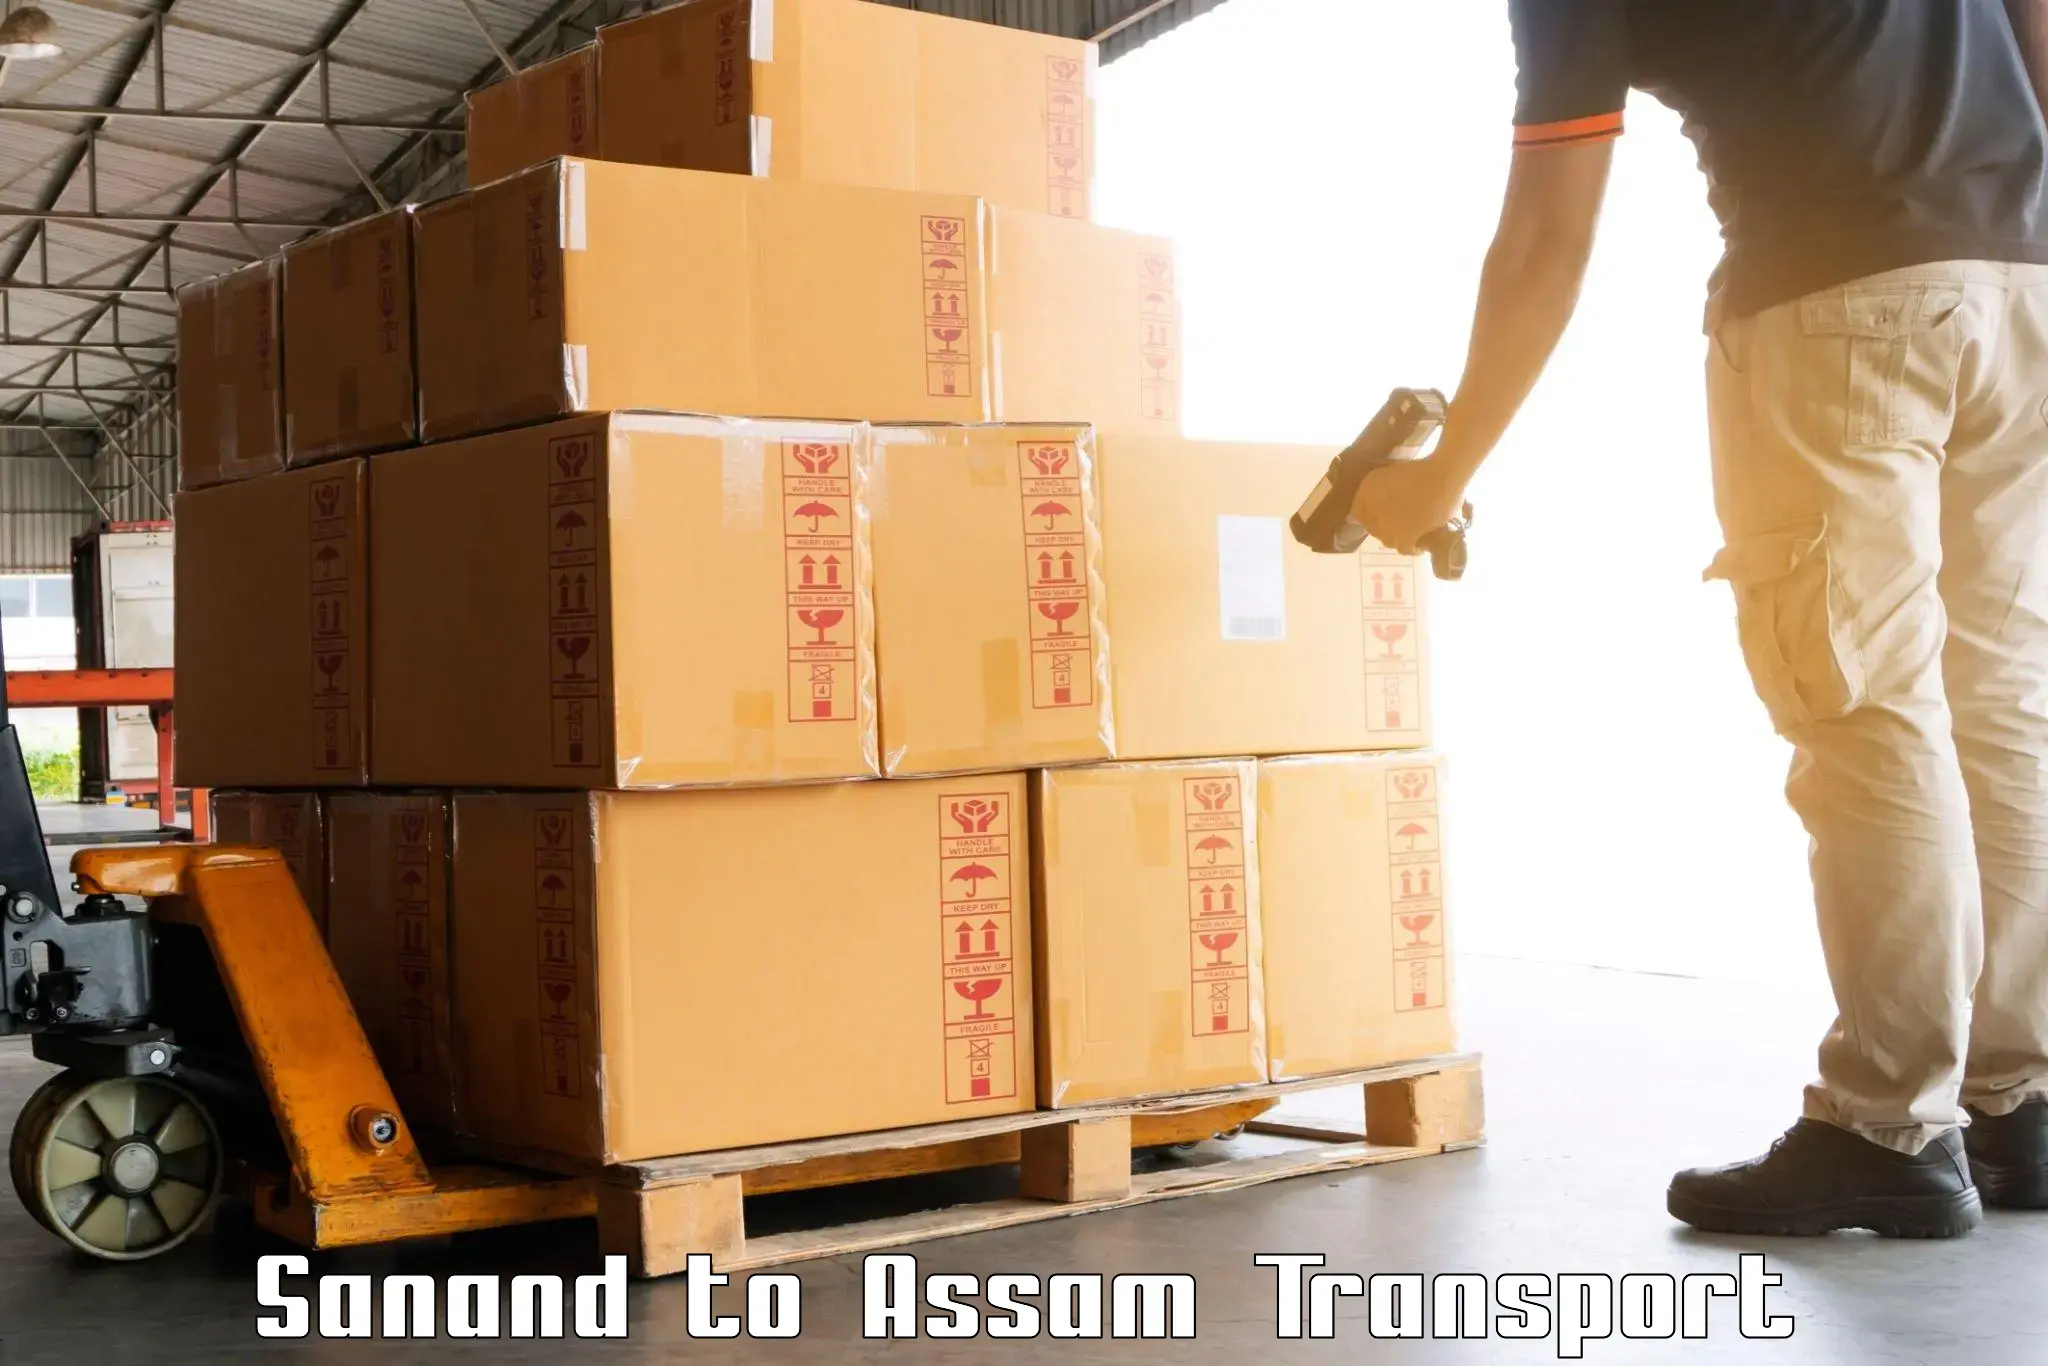 Truck transport companies in India in Sanand to Doom Dooma